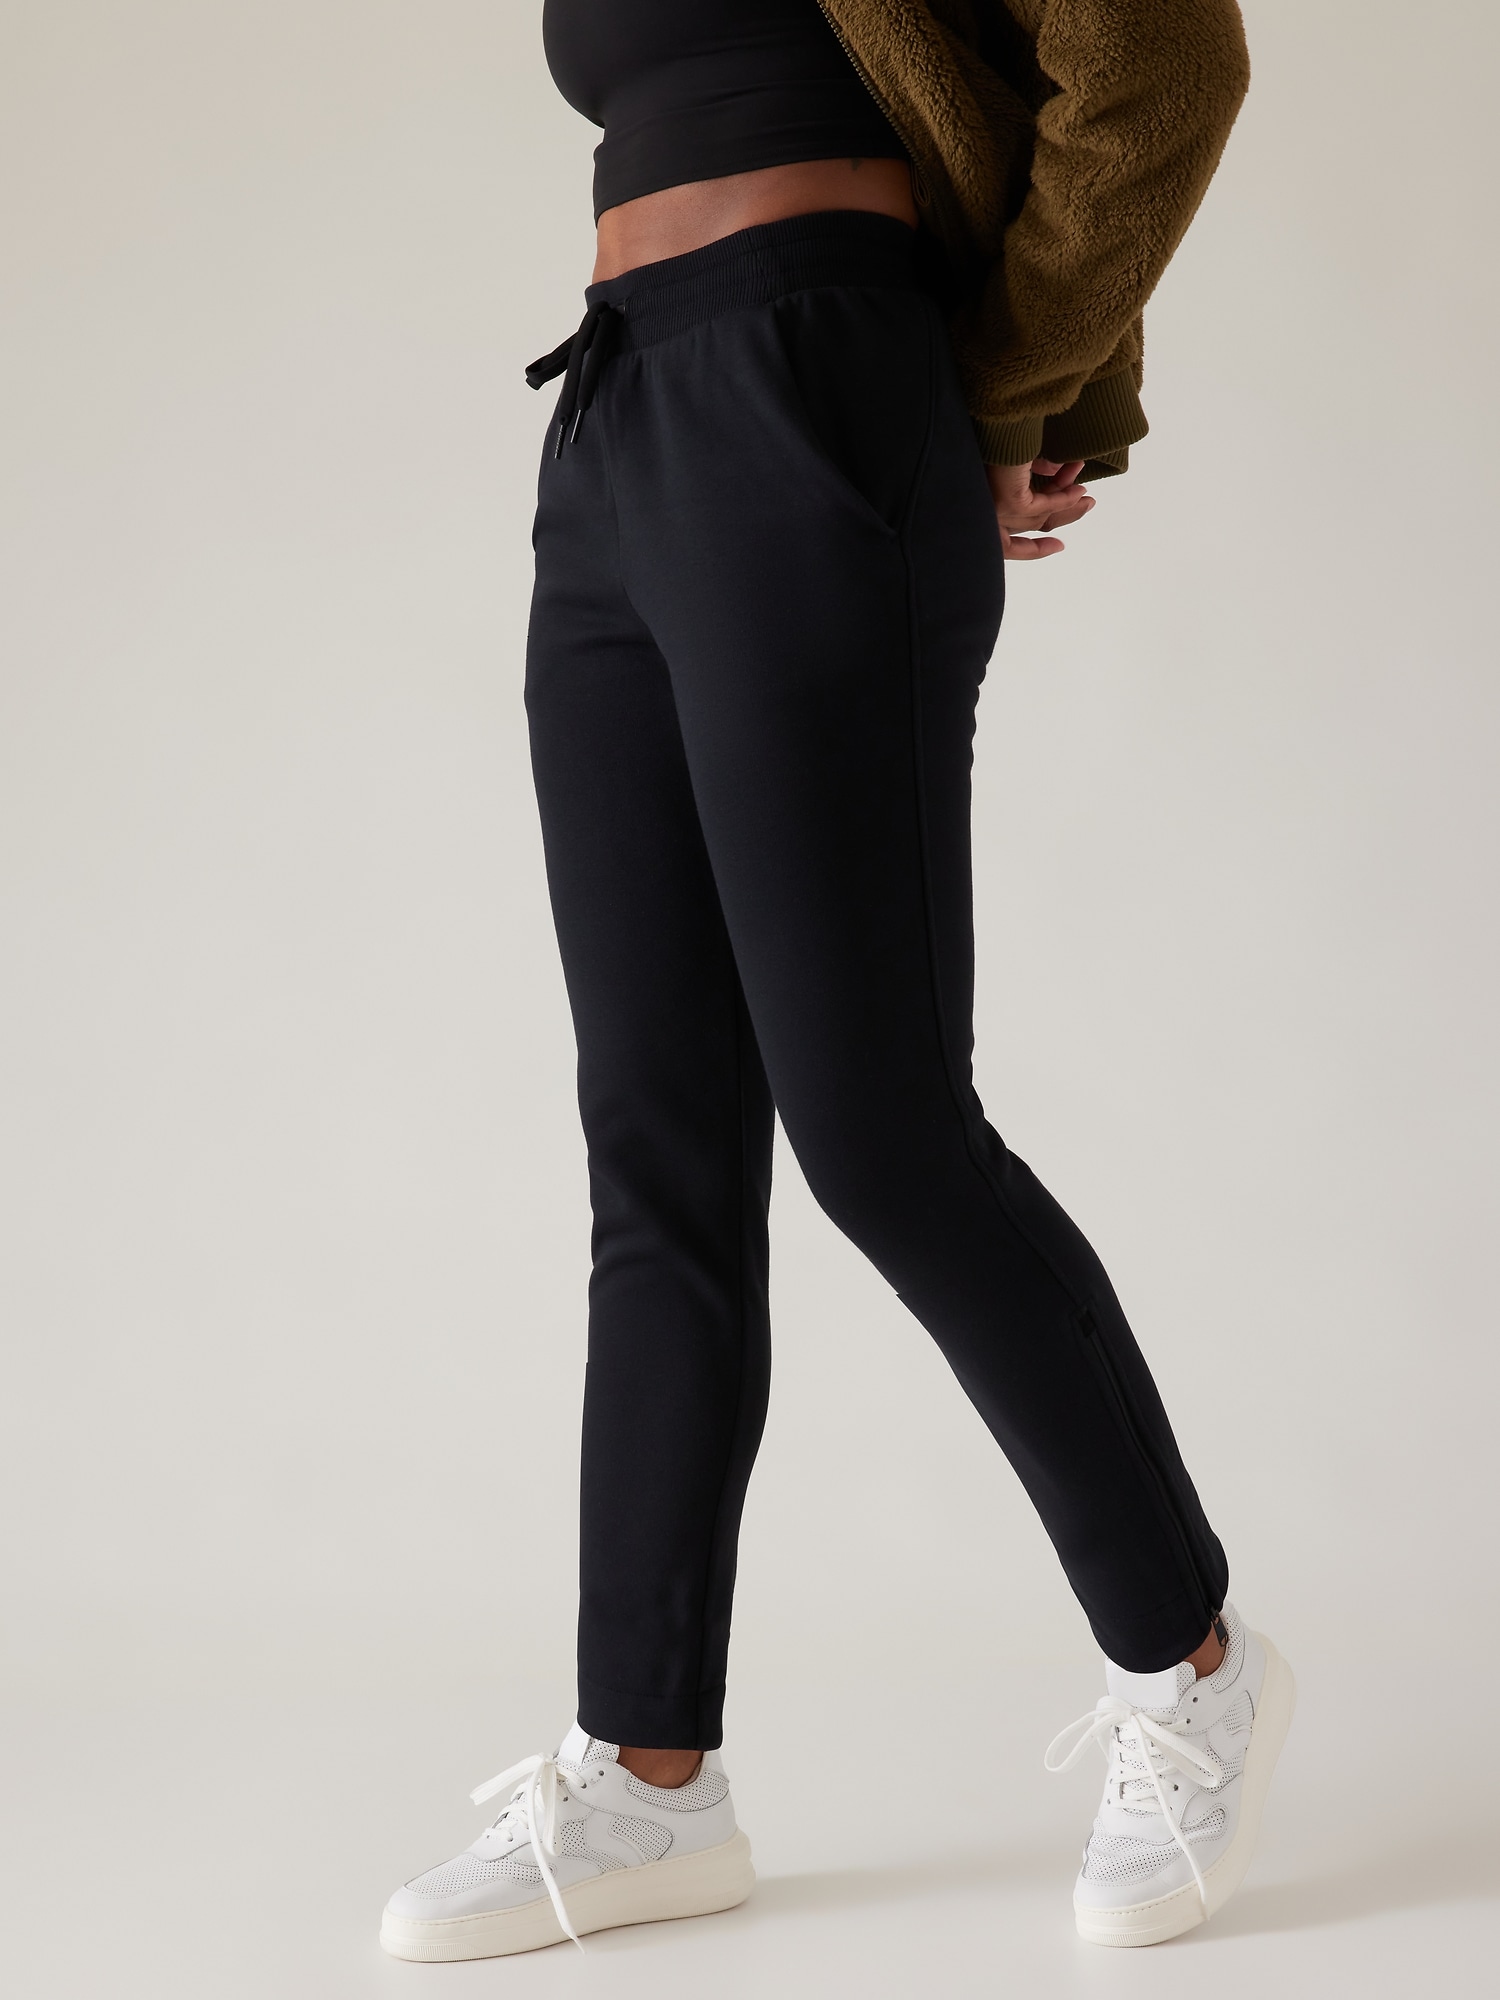 Can anyone ID these athleta pants?: RN#54023. Couldn't find this style  anywhere- it has a clear inside tag with purple athleta logo : r/poshmark